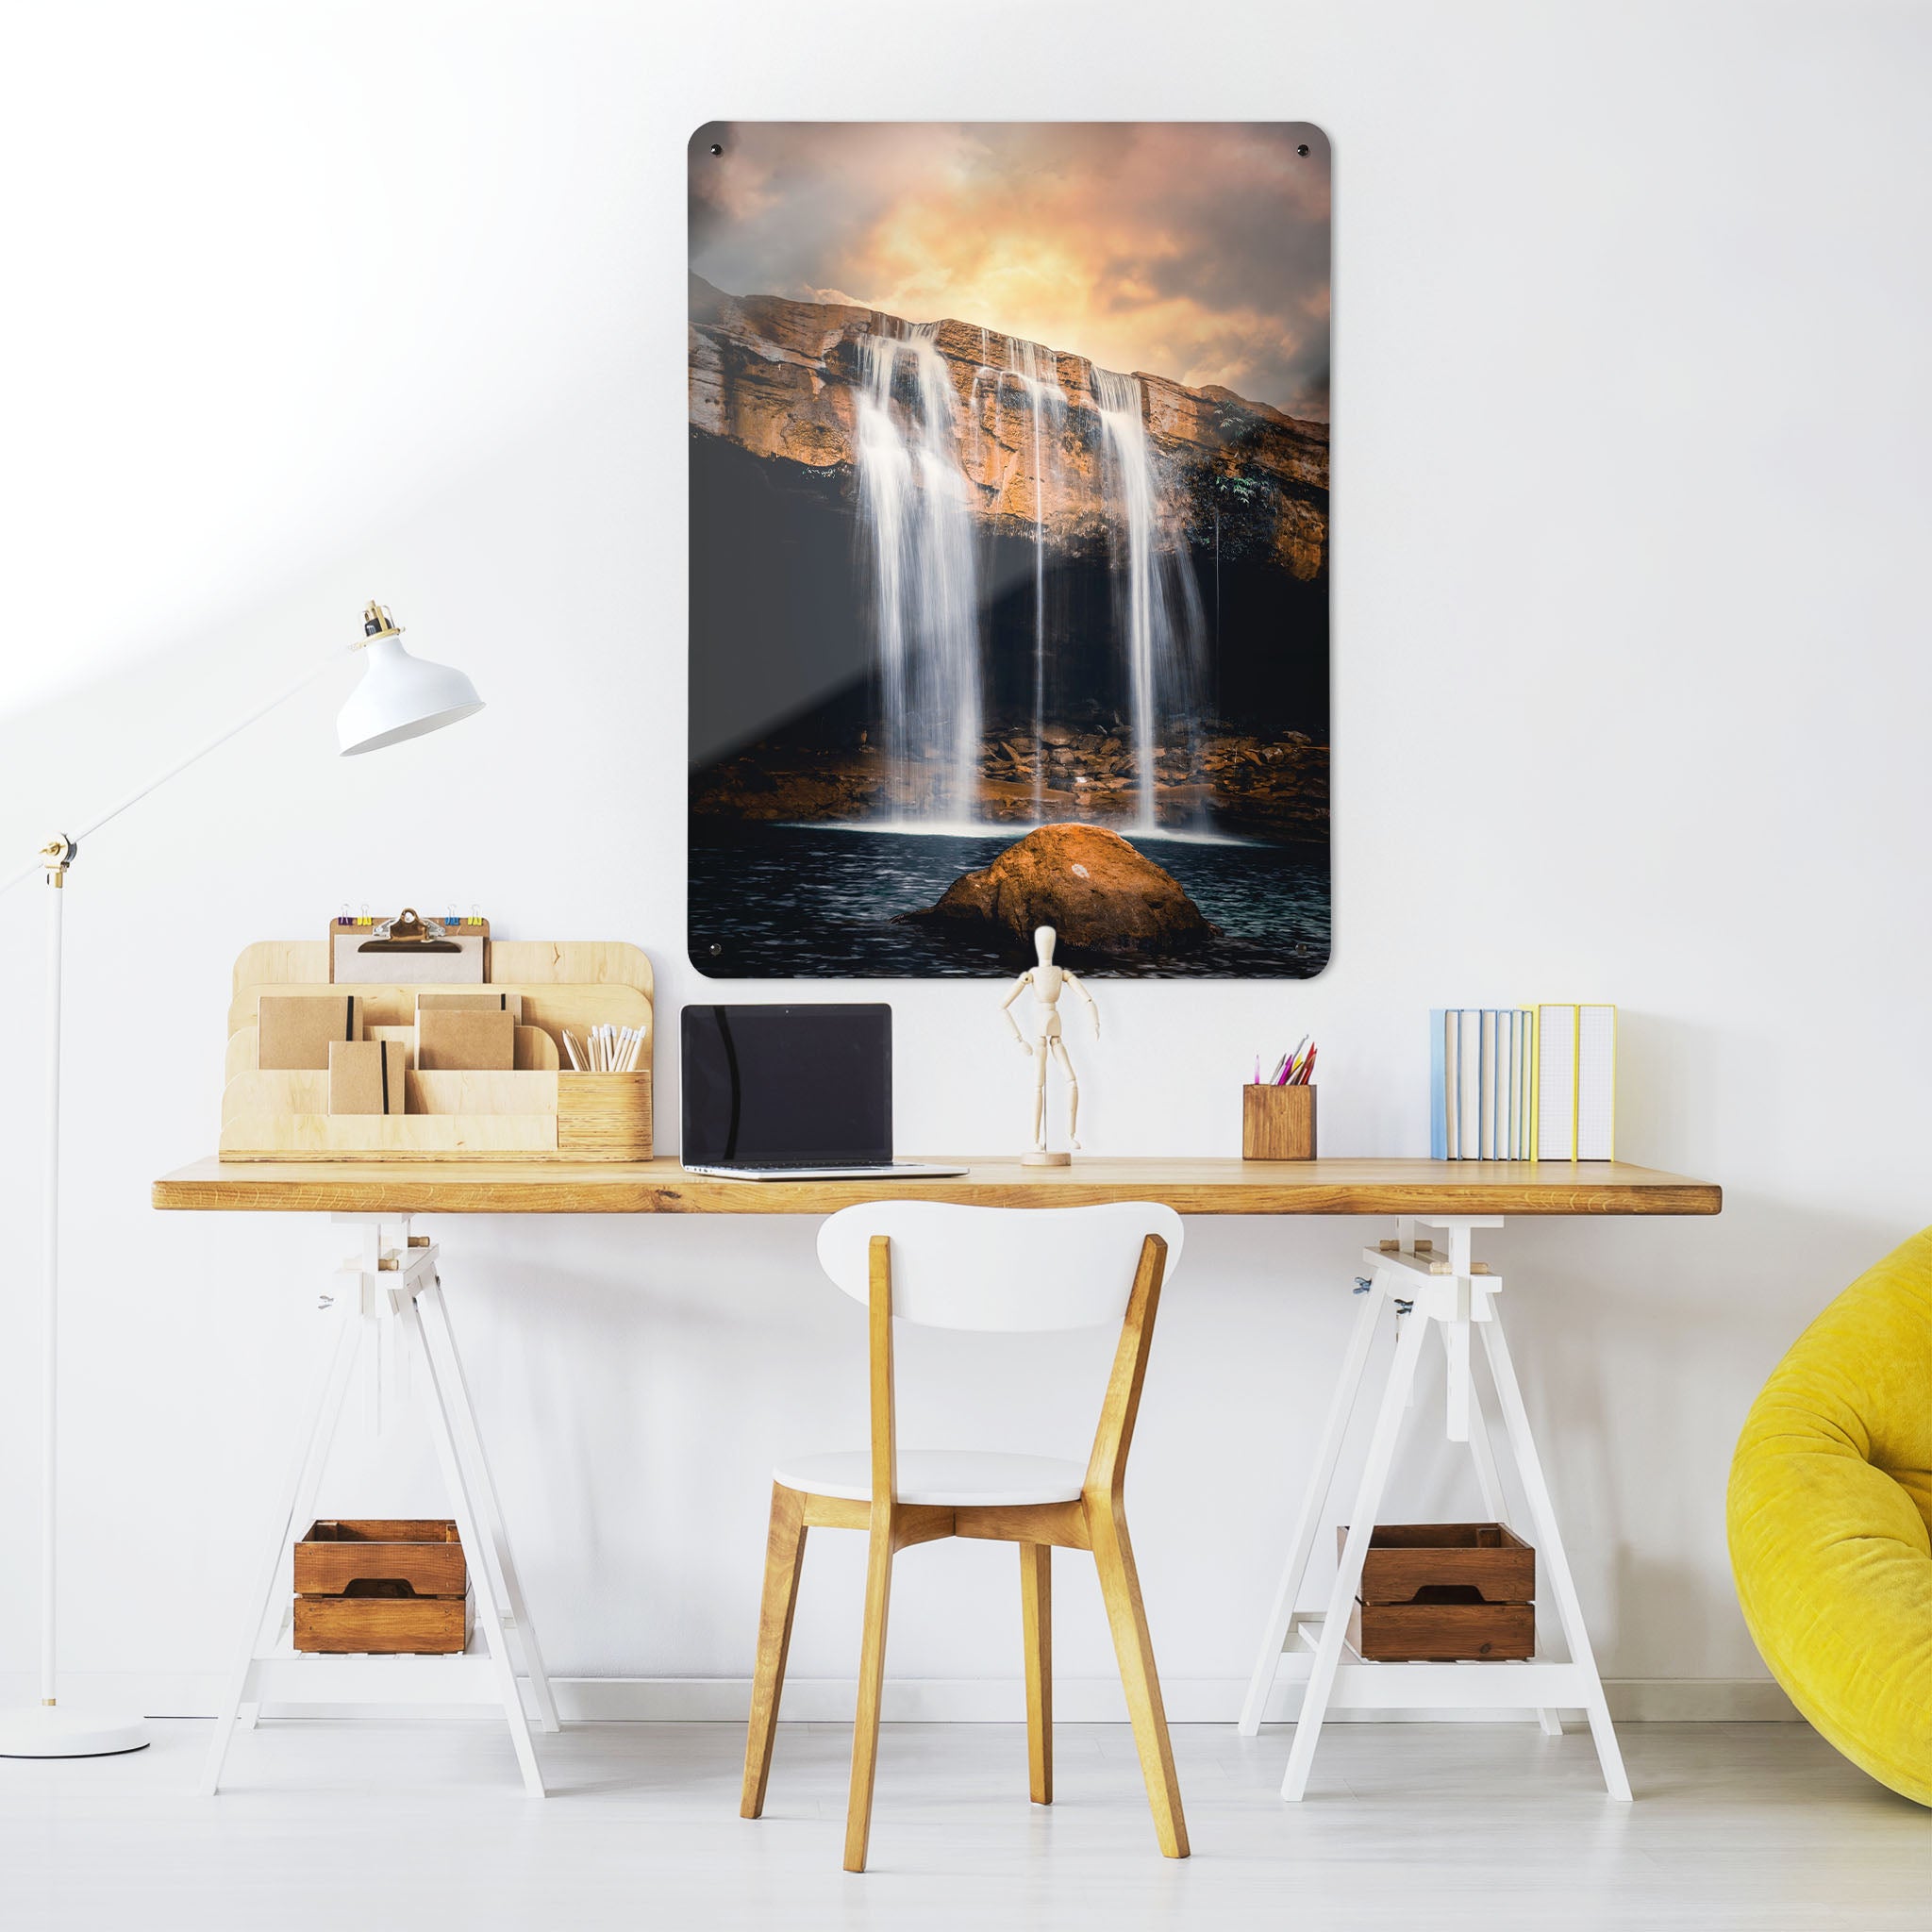 A desk in a workspace setting in a white interior with a magnetic metal wall art panel showing a waterfall at sunset